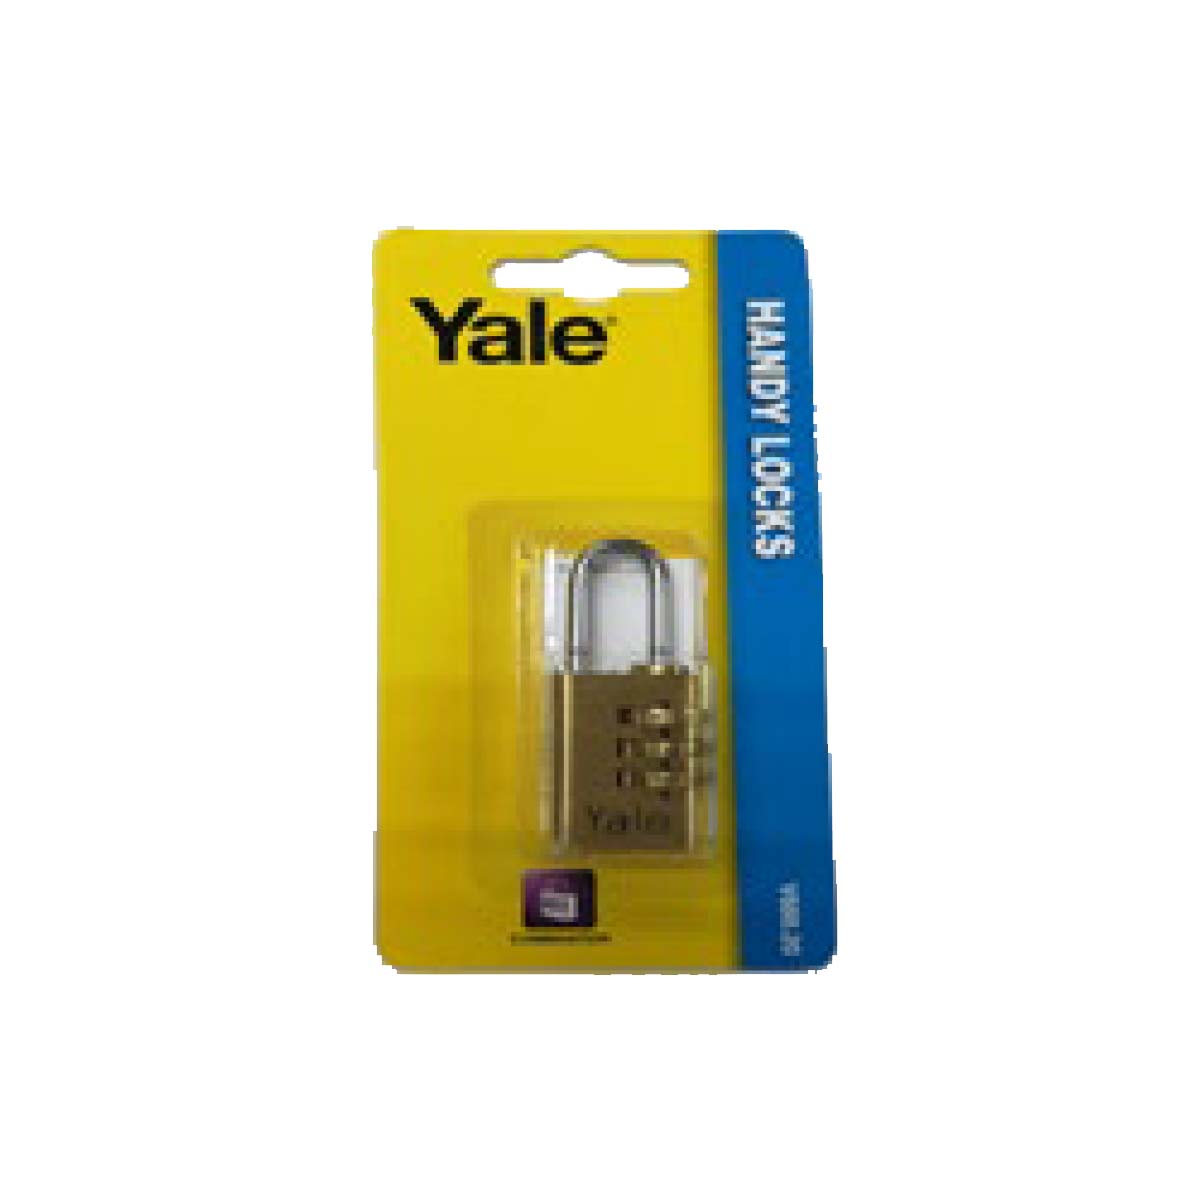 Yale Resettable V688.20